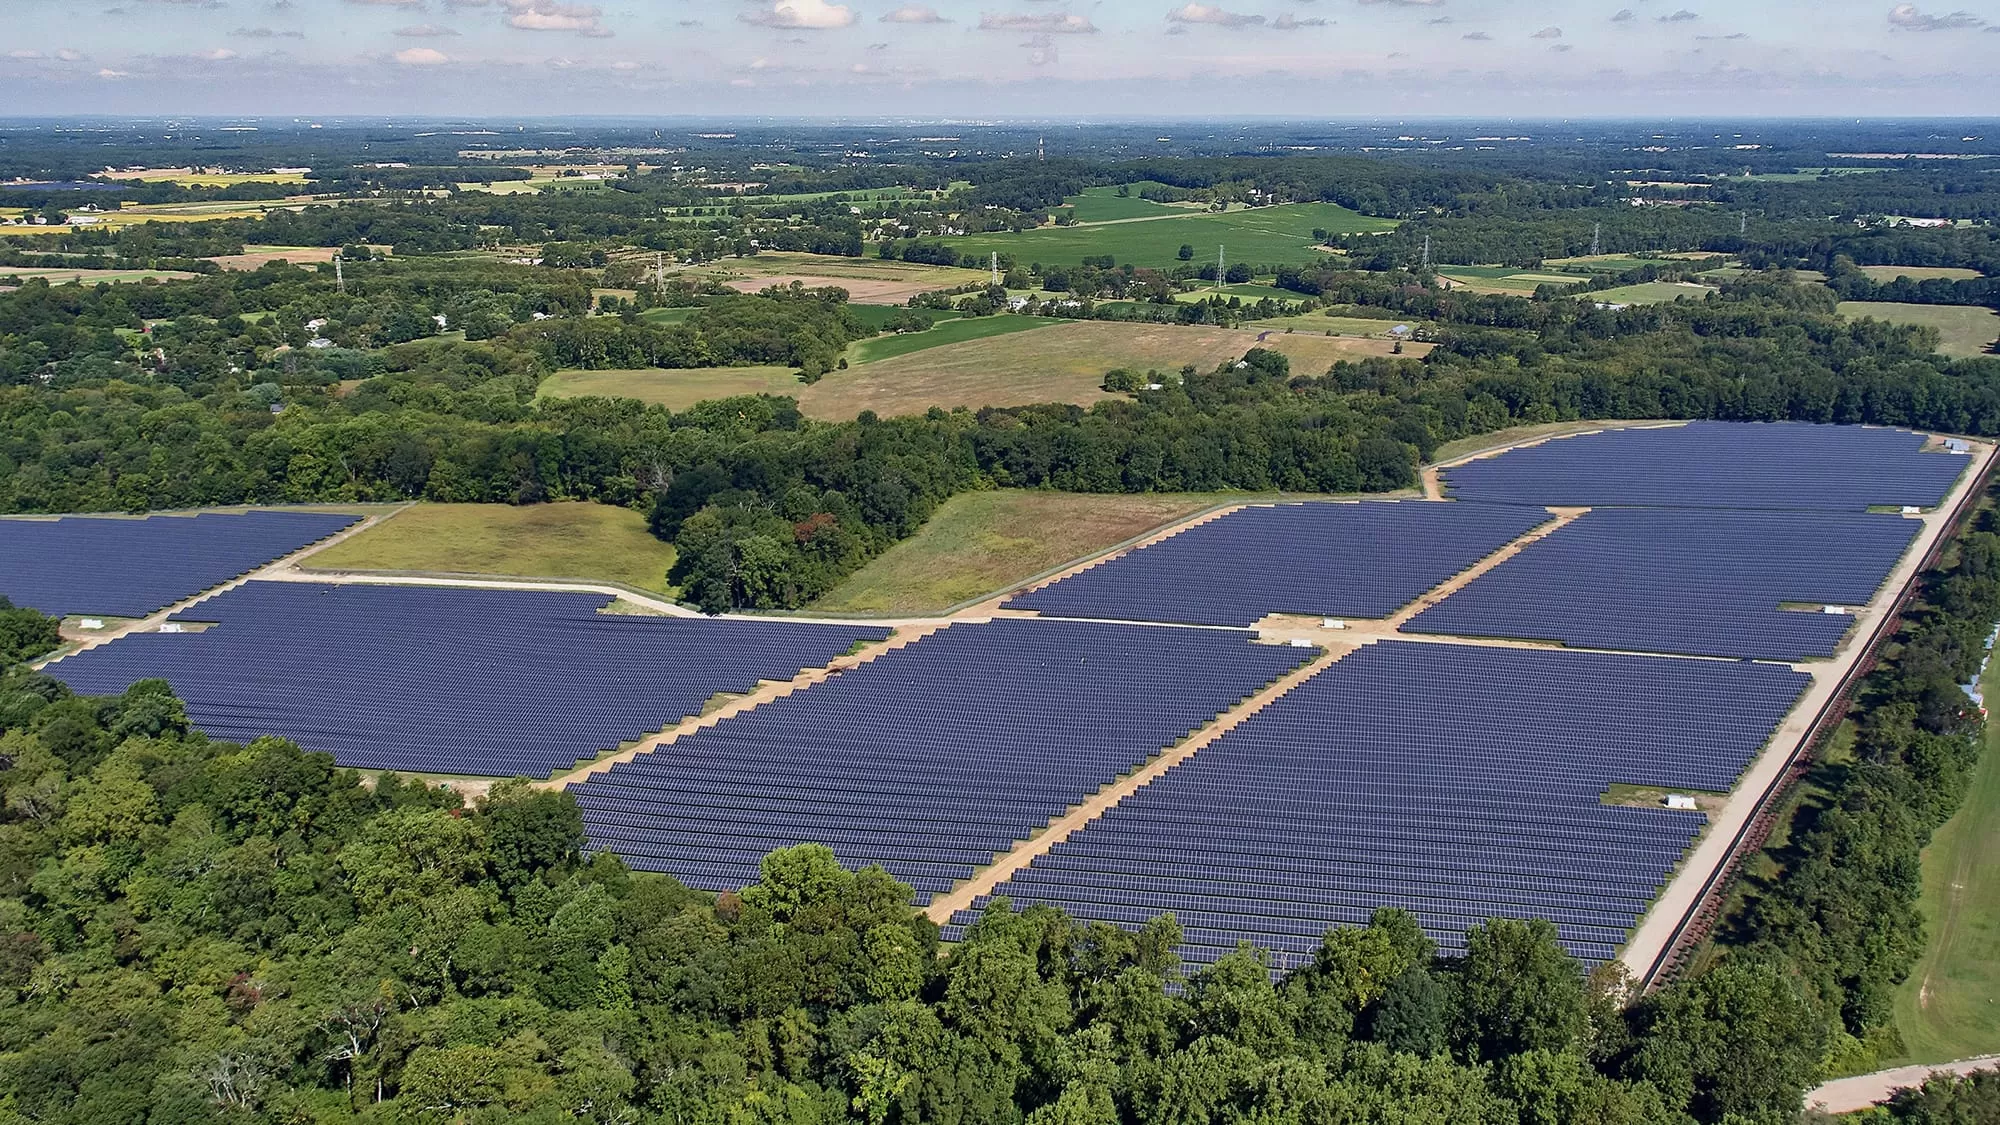 Overview of a field of solar panels